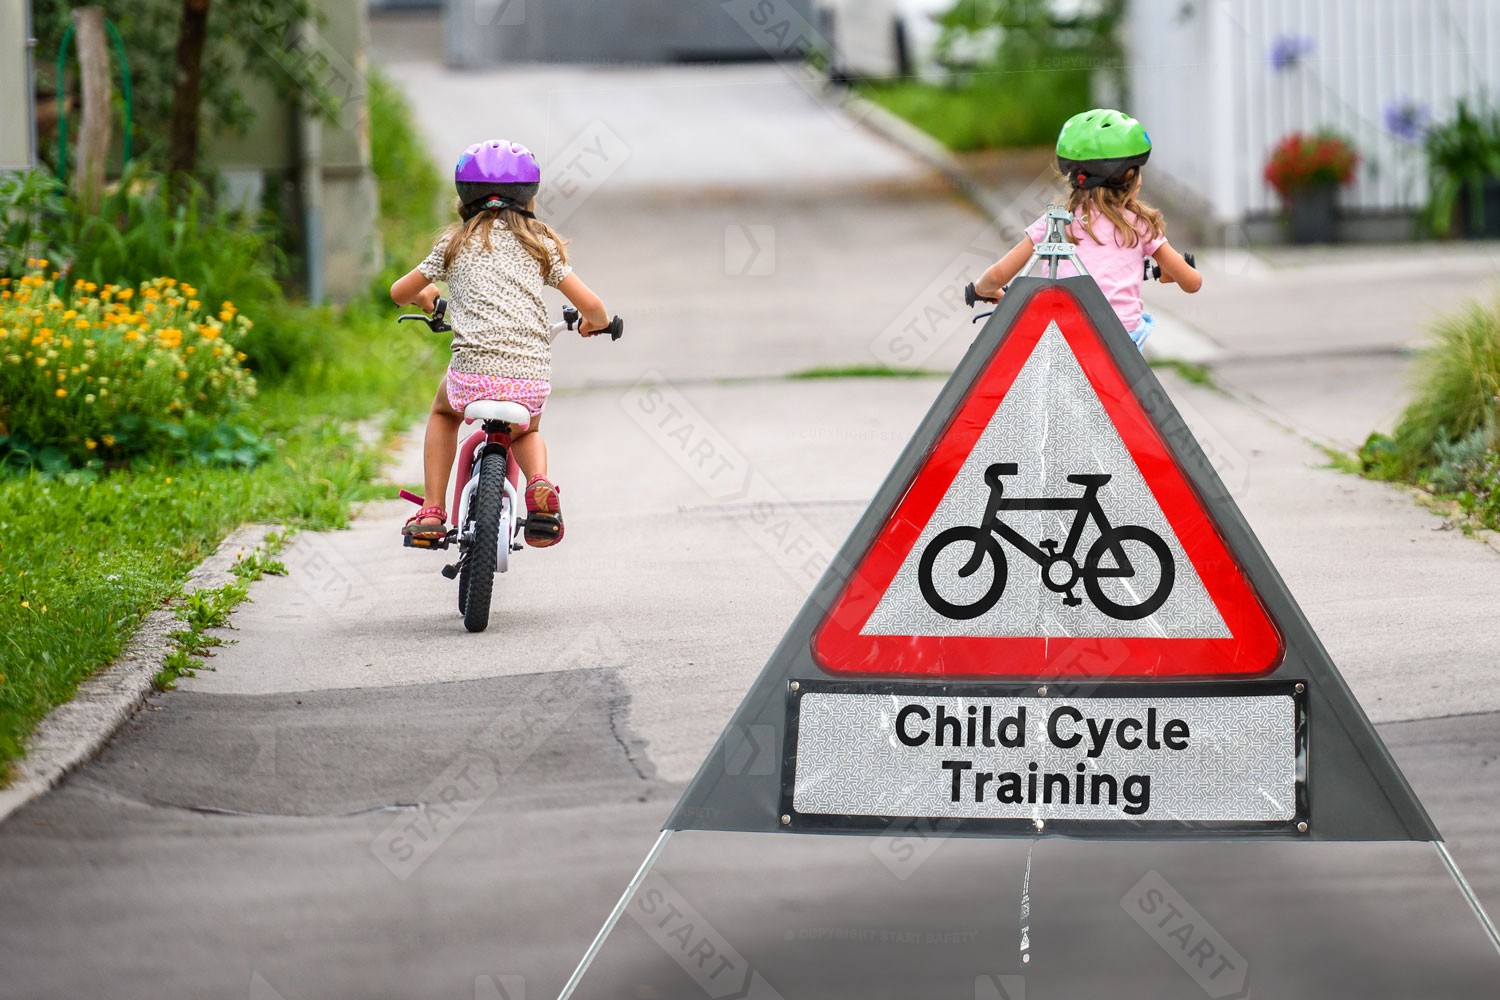 Classic Cycle Route Ahead Roll-up Sign With Child Cycle Training Supplementary Plate